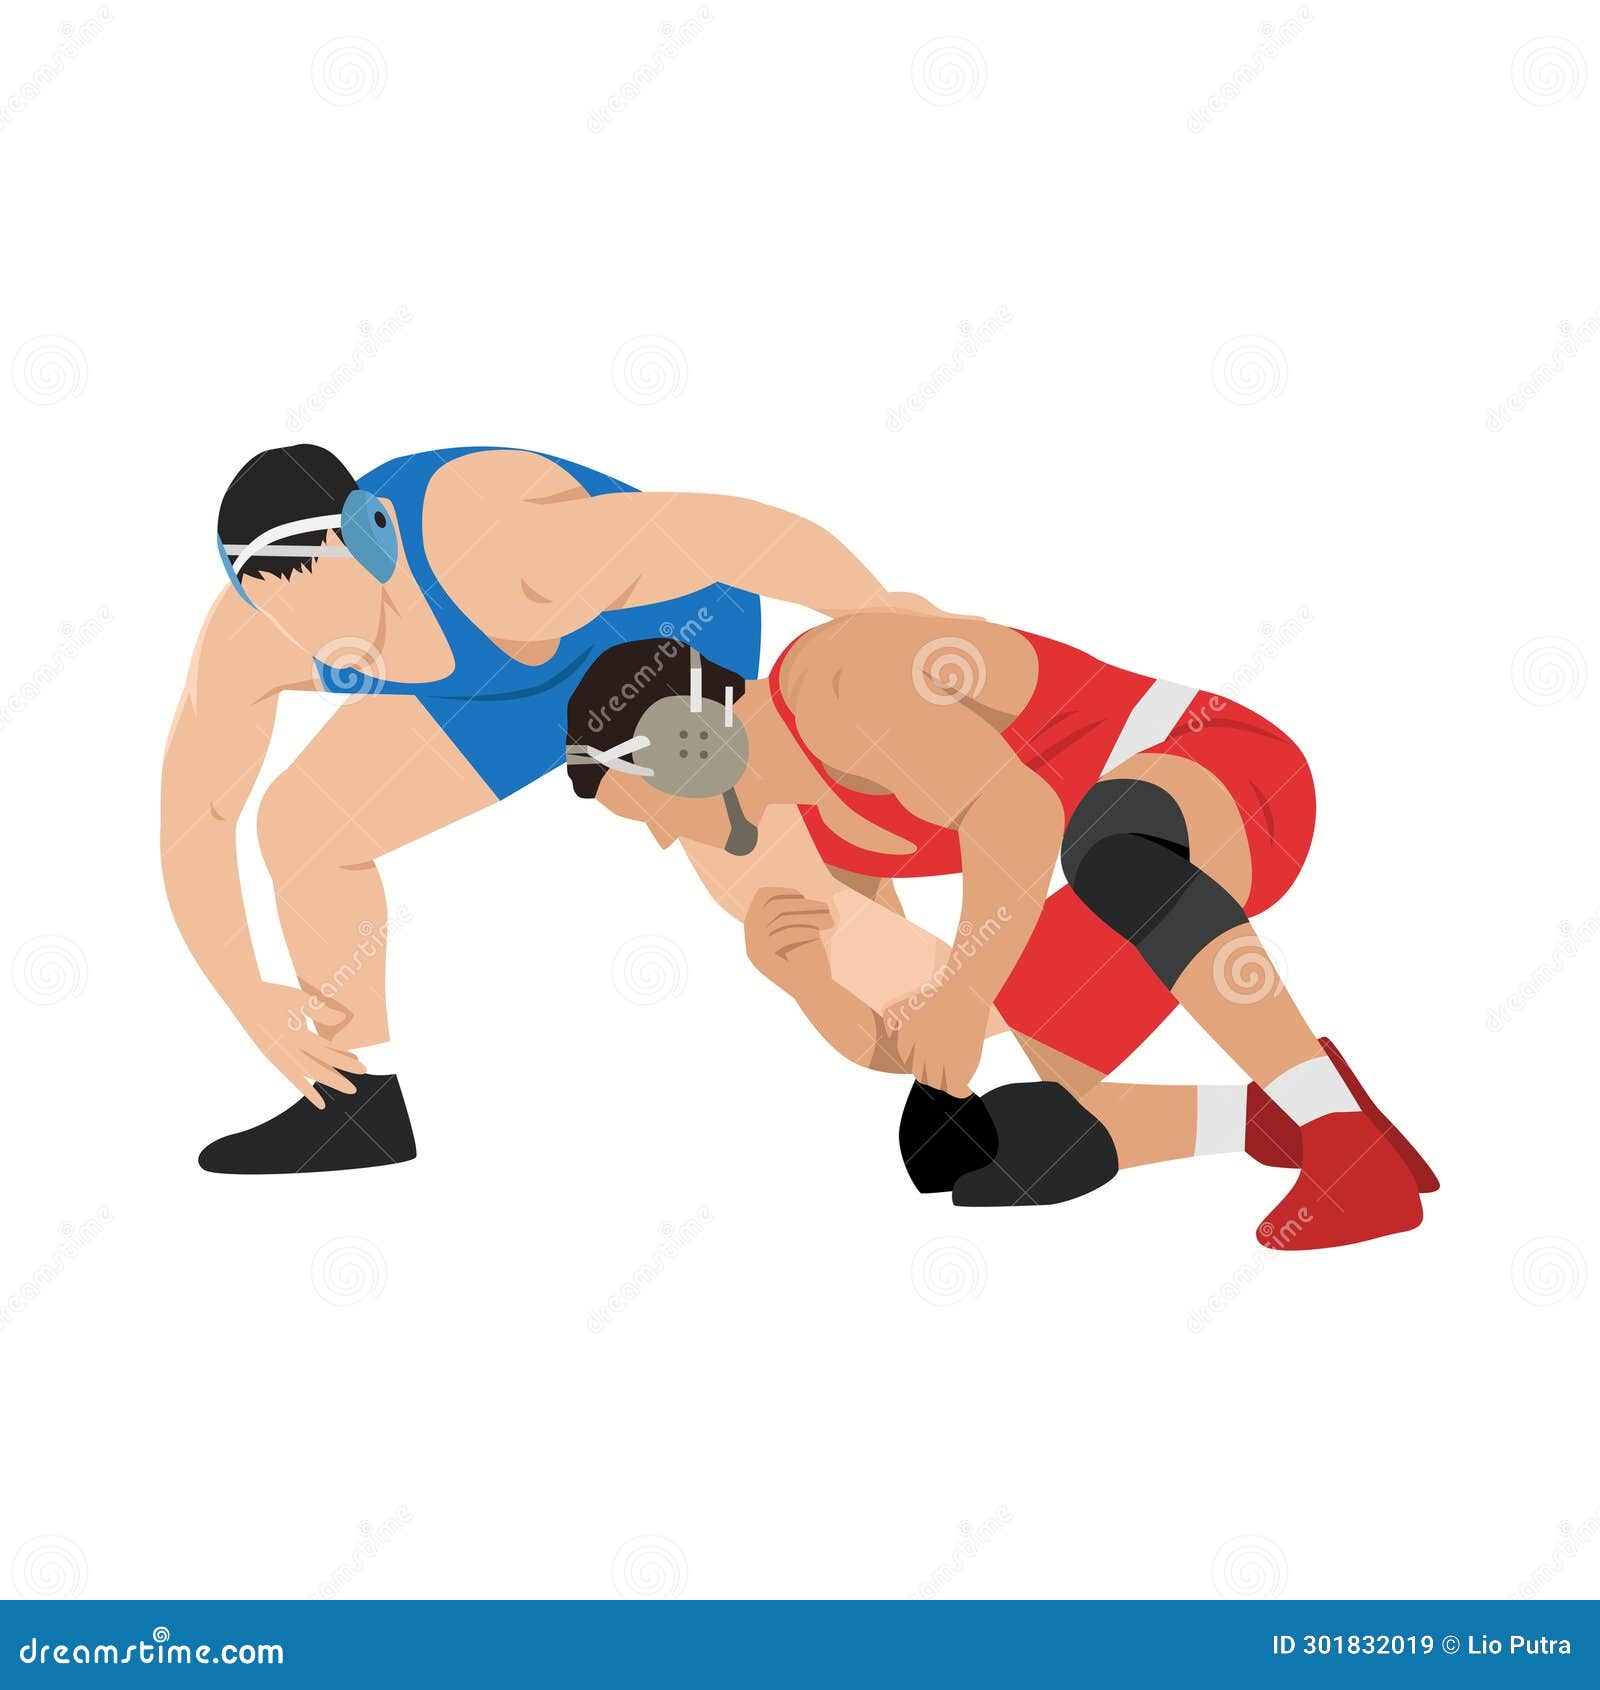 image of athletes wrestlers in wrestling, fighting. greco roman wrestling fight combating, grappling, duel, mixed martial art